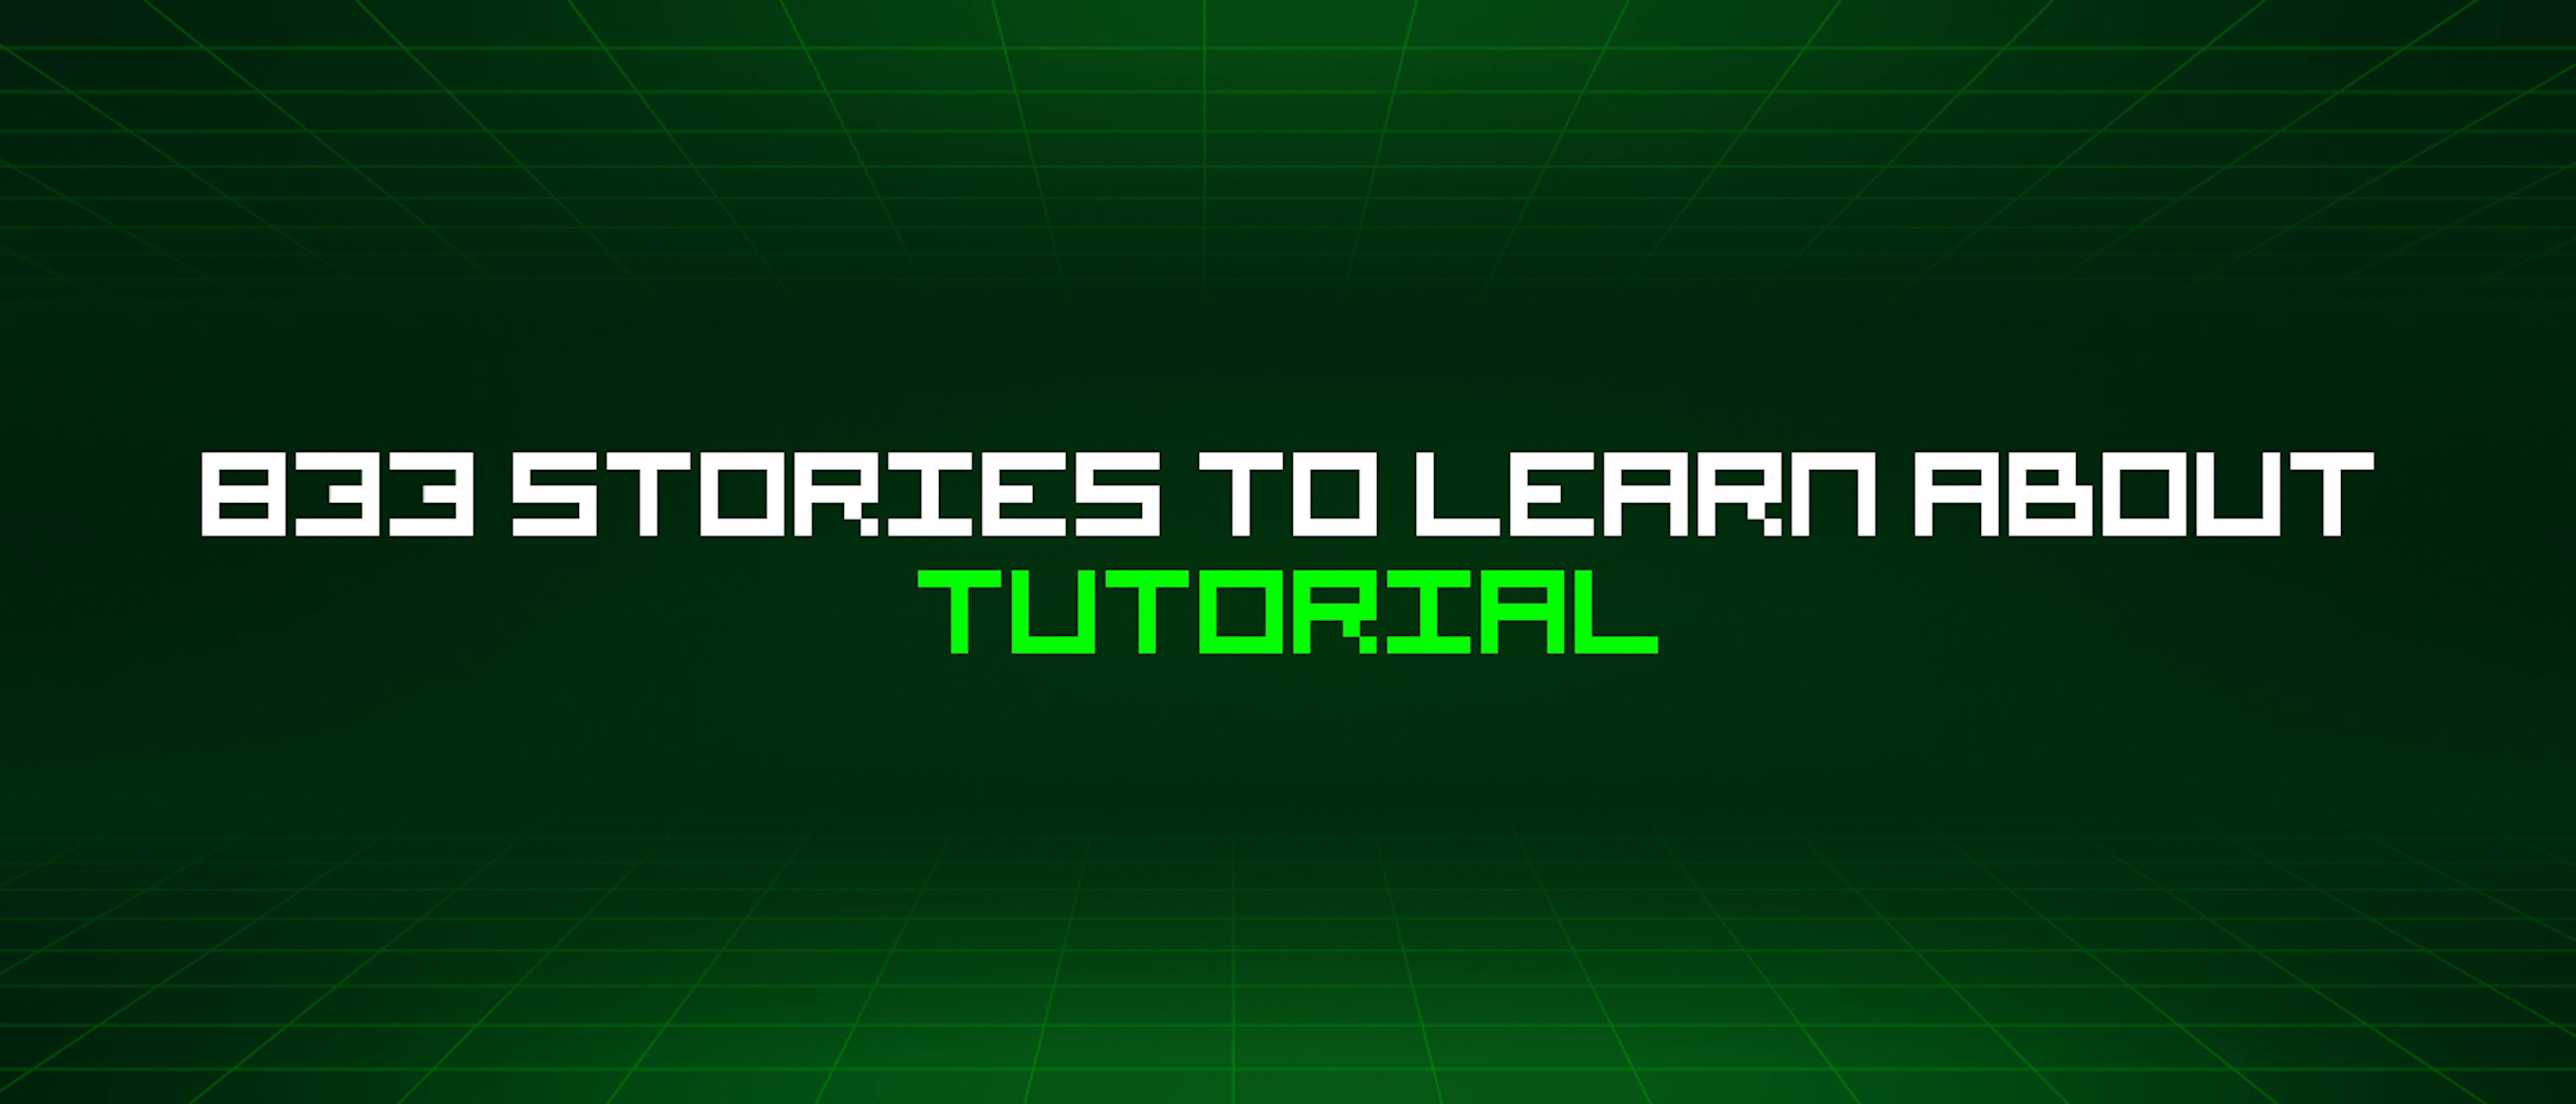 featured image - 833 Stories To Learn About Tutorial